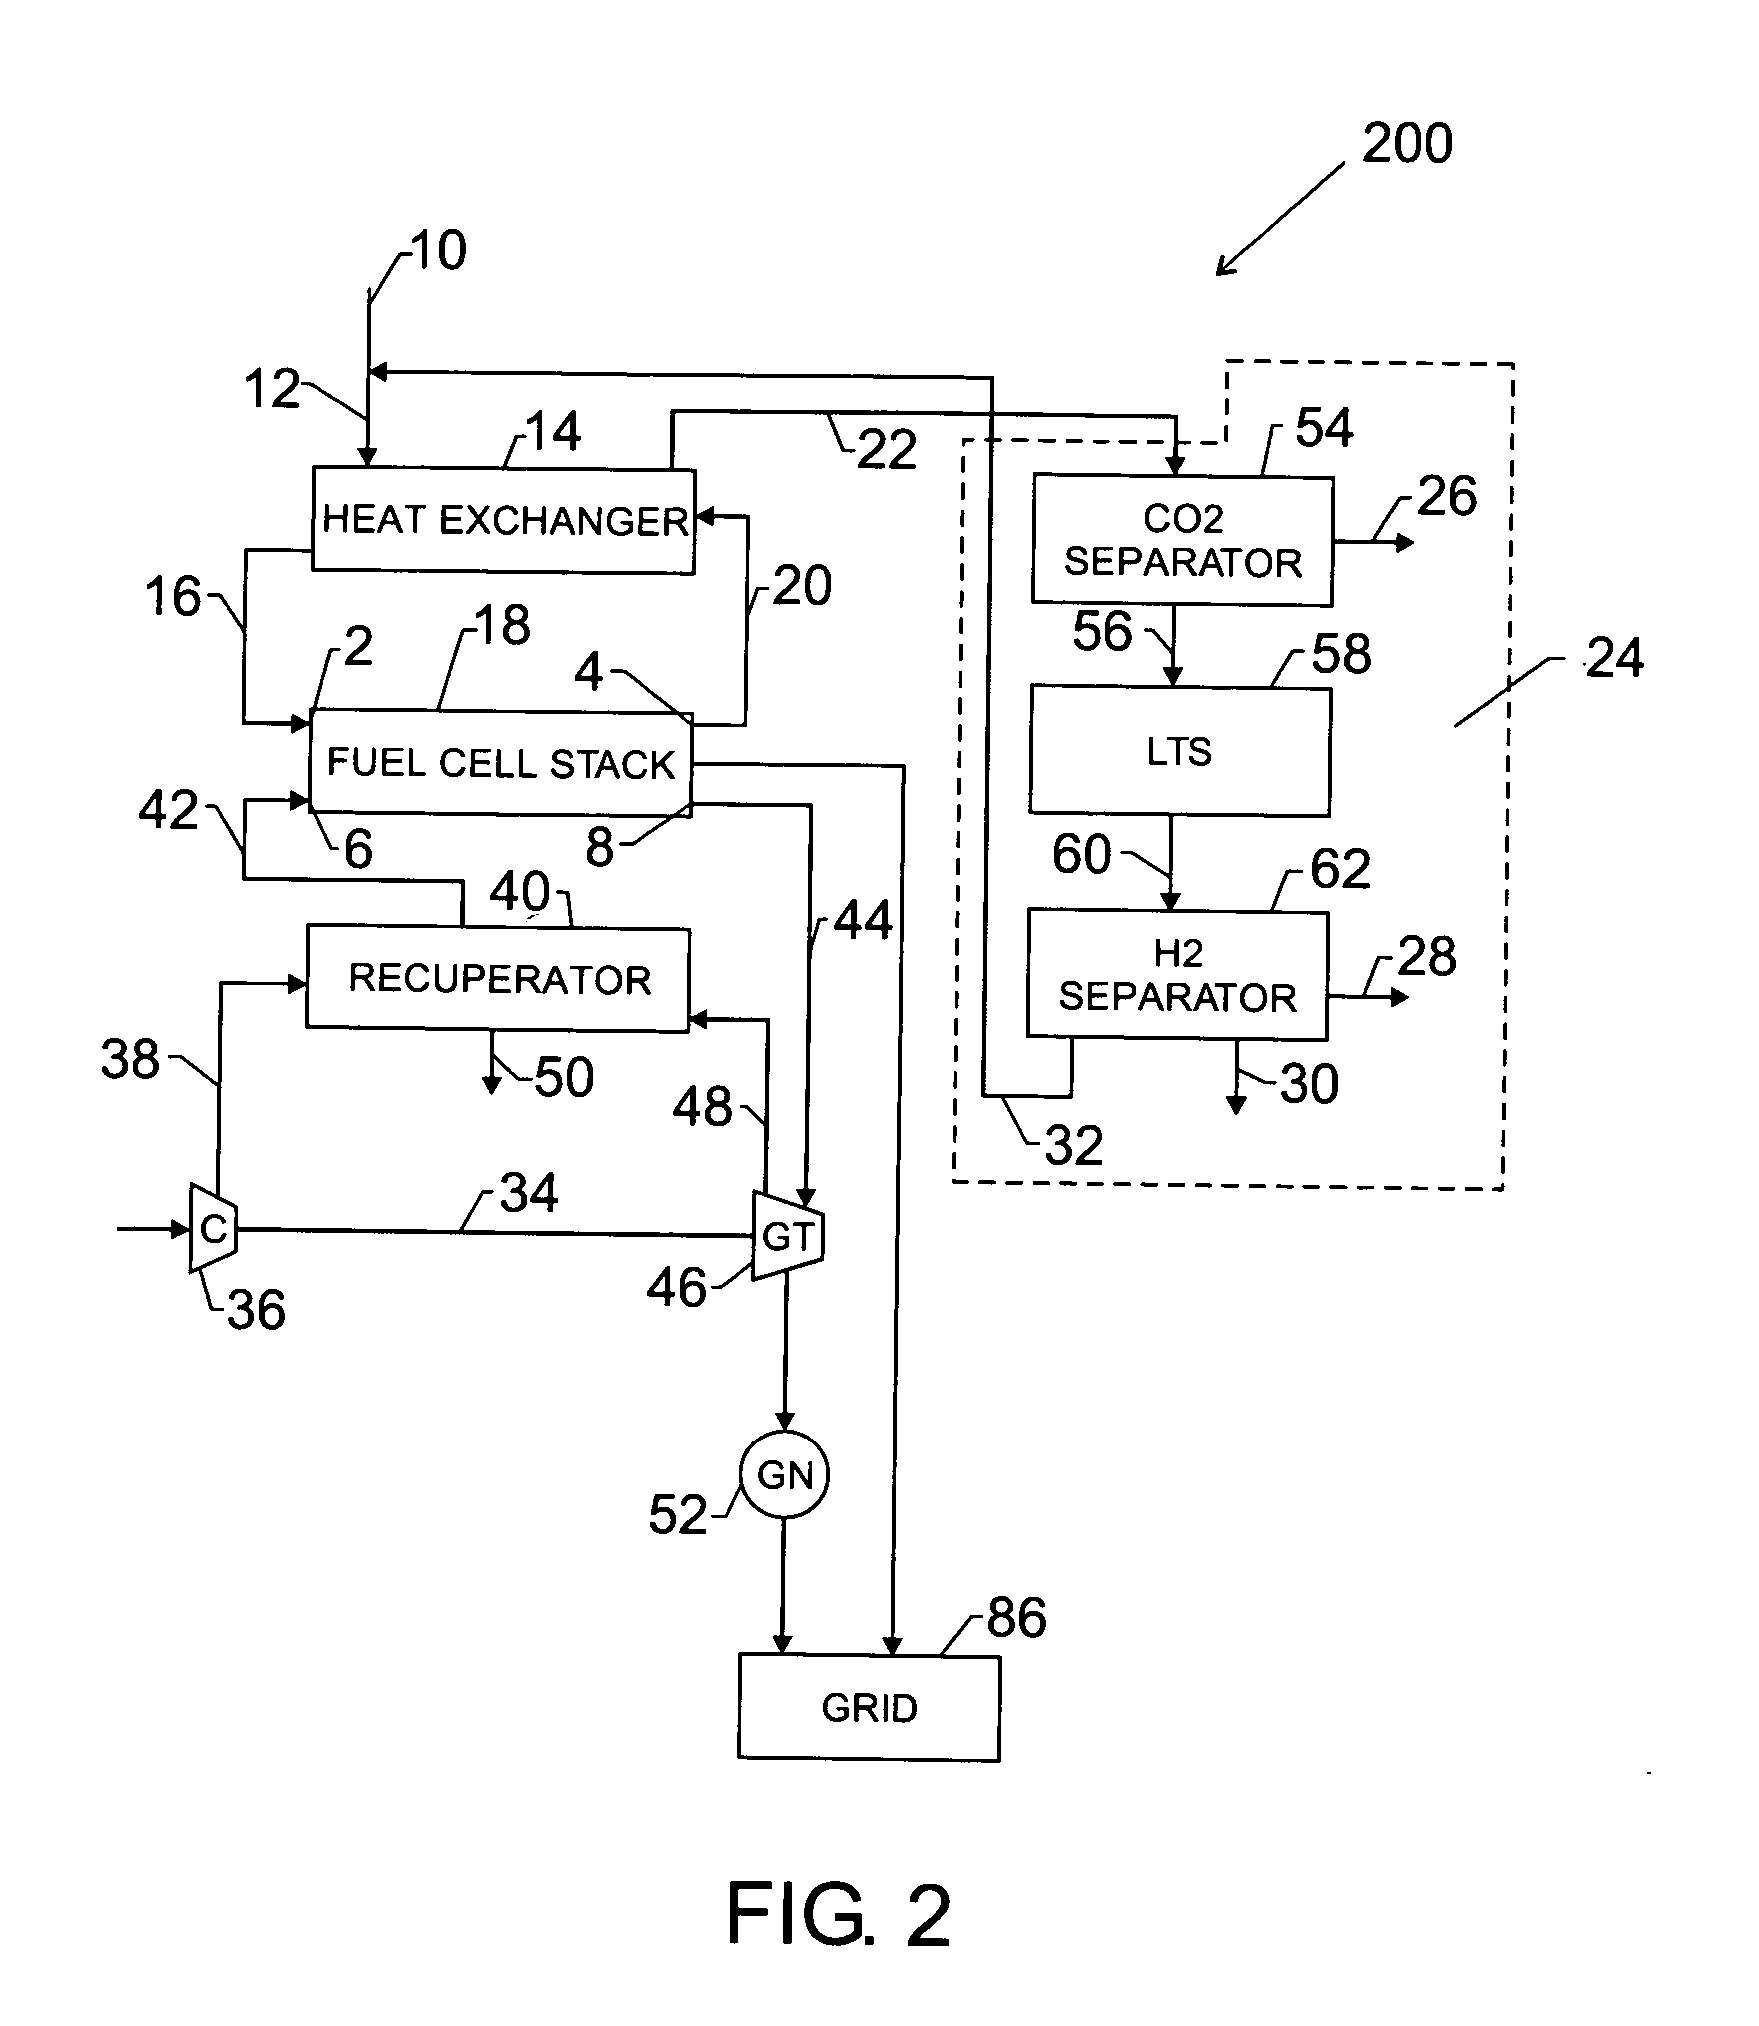 System and method for co-production of hydrogen and electrical energy